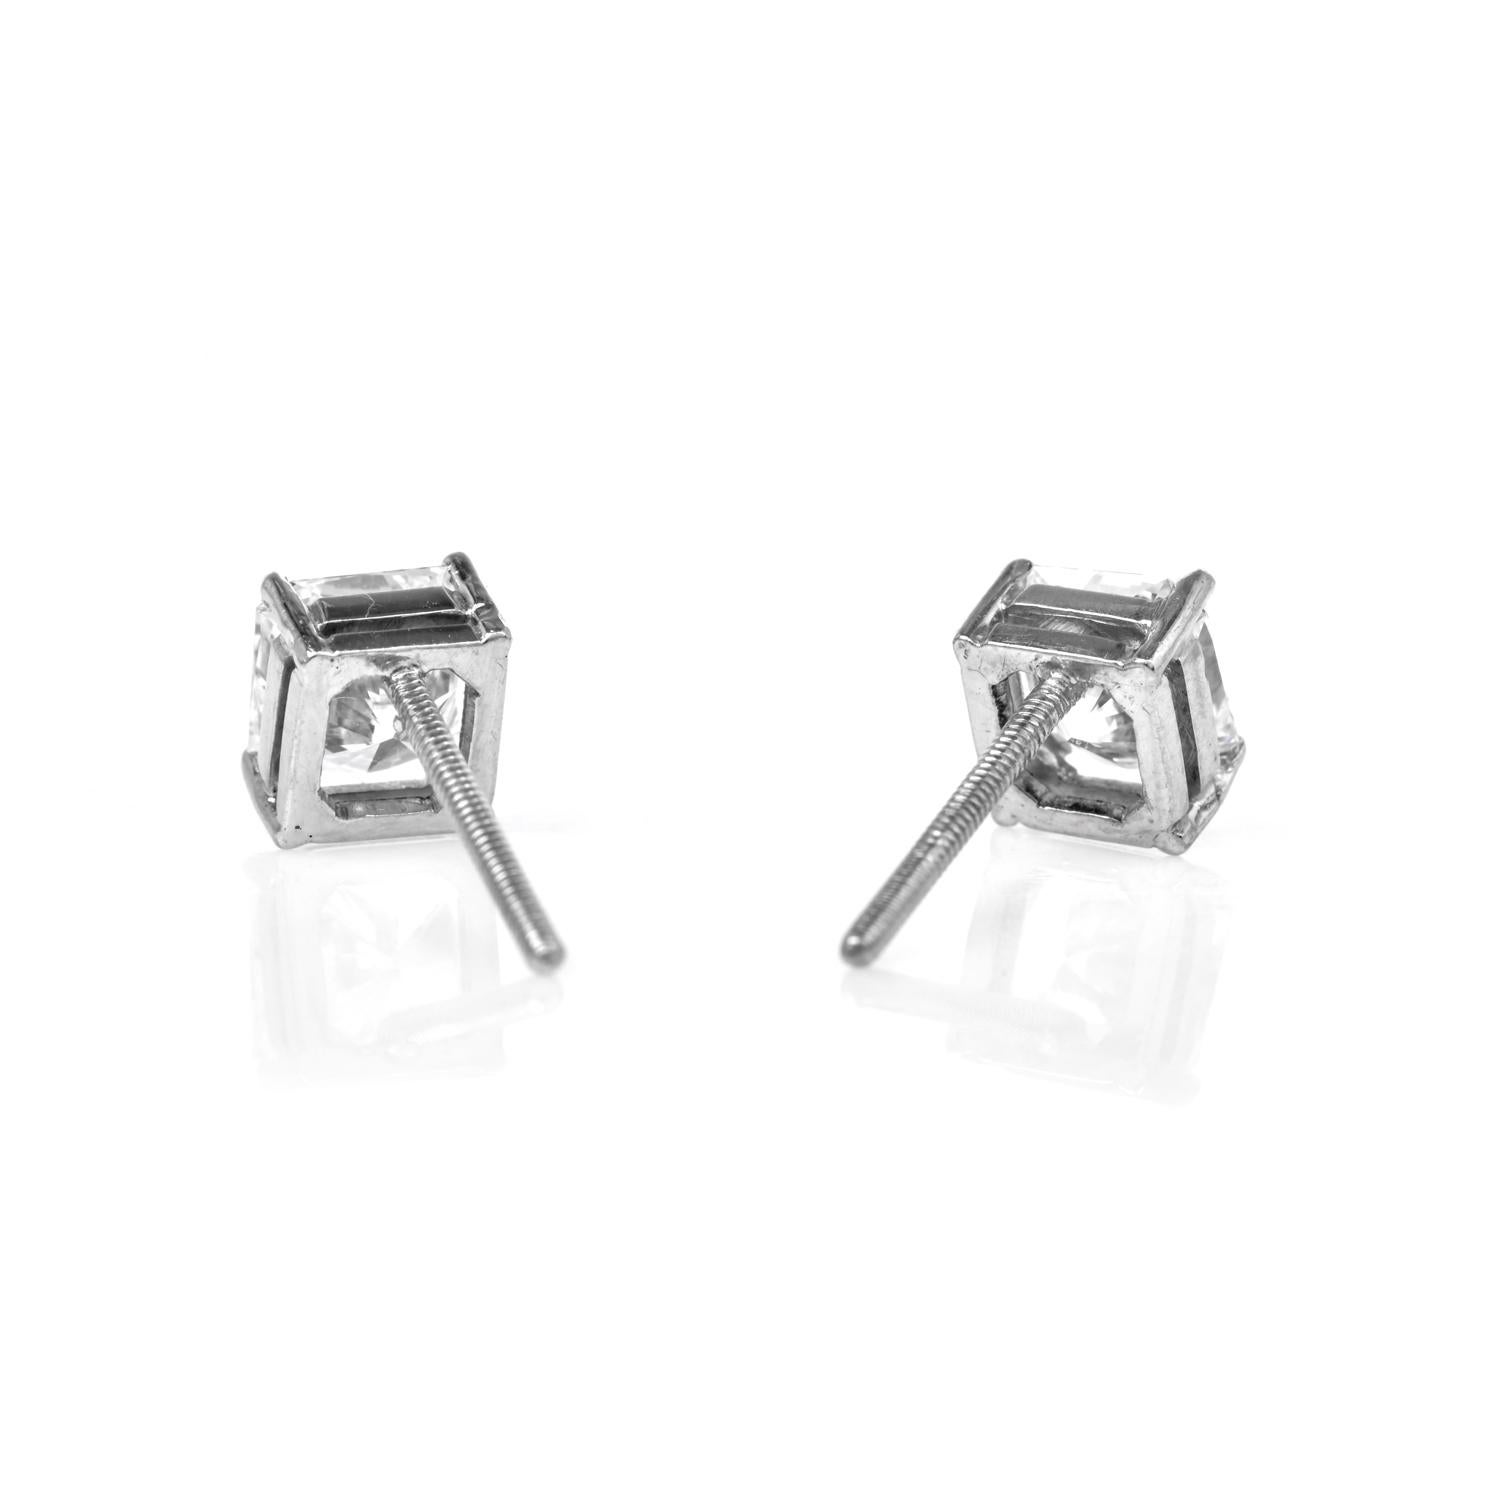 Natural Cut-Cornered Square Modified Brilliant diamond prong set in 14K white gold stud earrings. Secured with Screw Backs for Pierced Ears.
Metal: 14K White Gold

GIA Report:
#7235209278: 1.04 F-VVS2
#2239209267: 1.09 E-VS1

Measurements: 6.5mm x